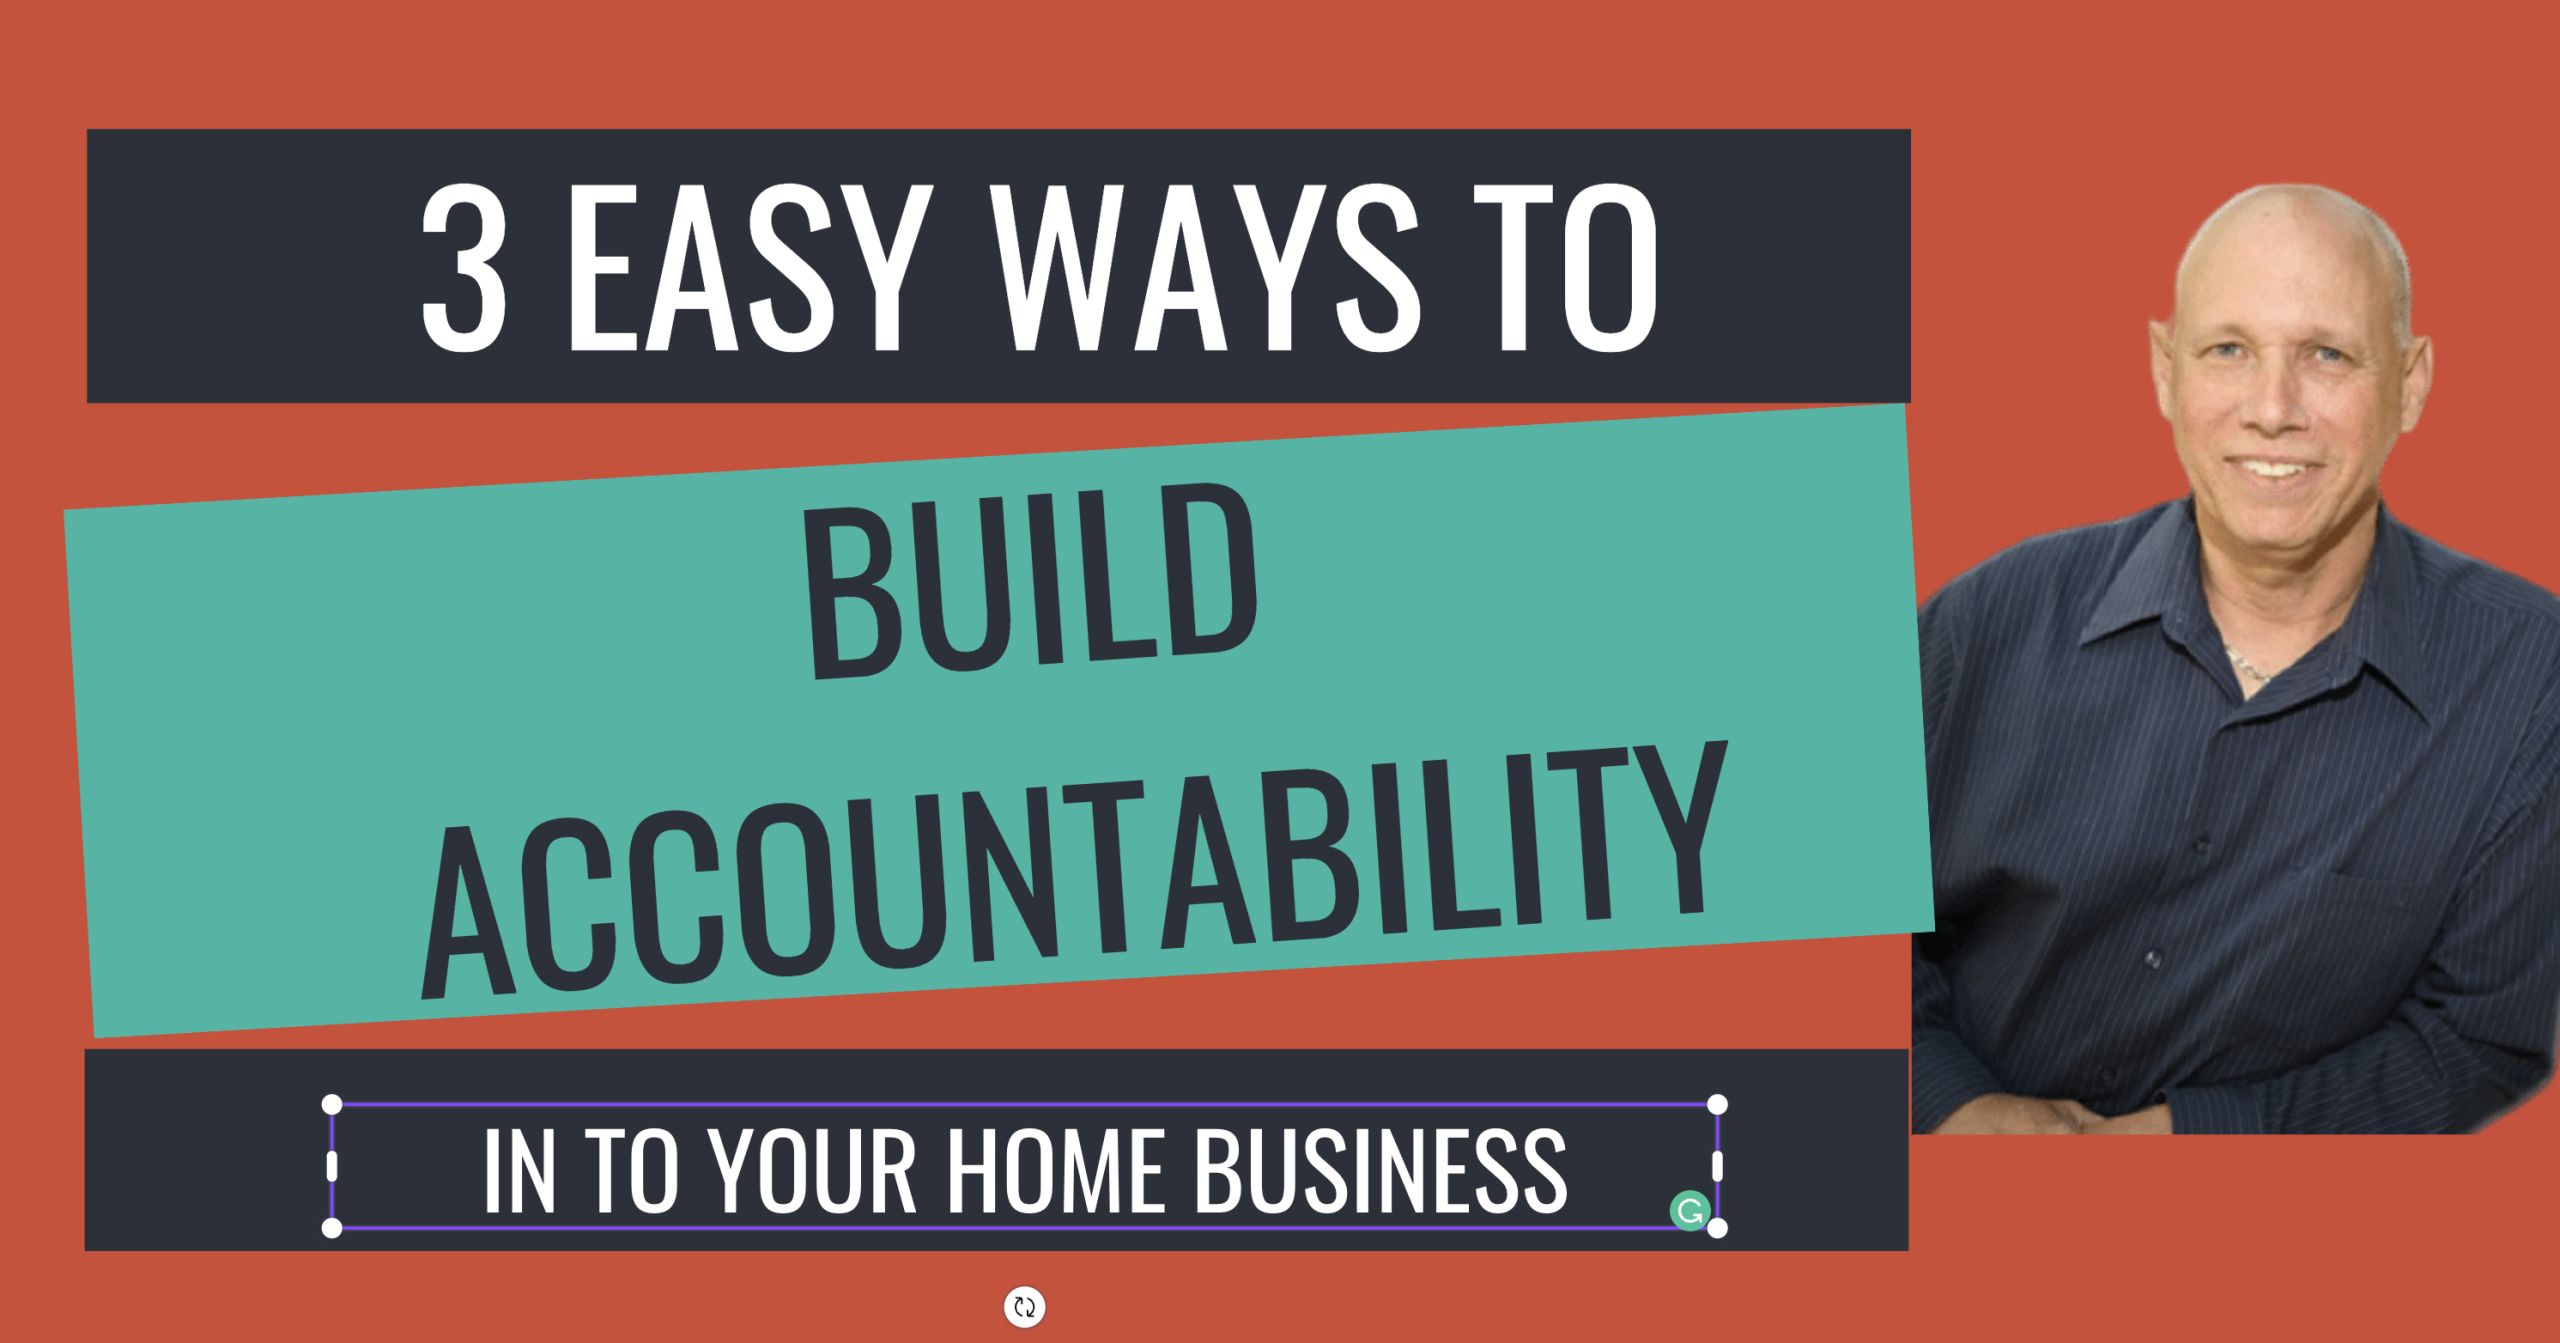 3 Easy Ways To Build Accountability Into Your Home Business